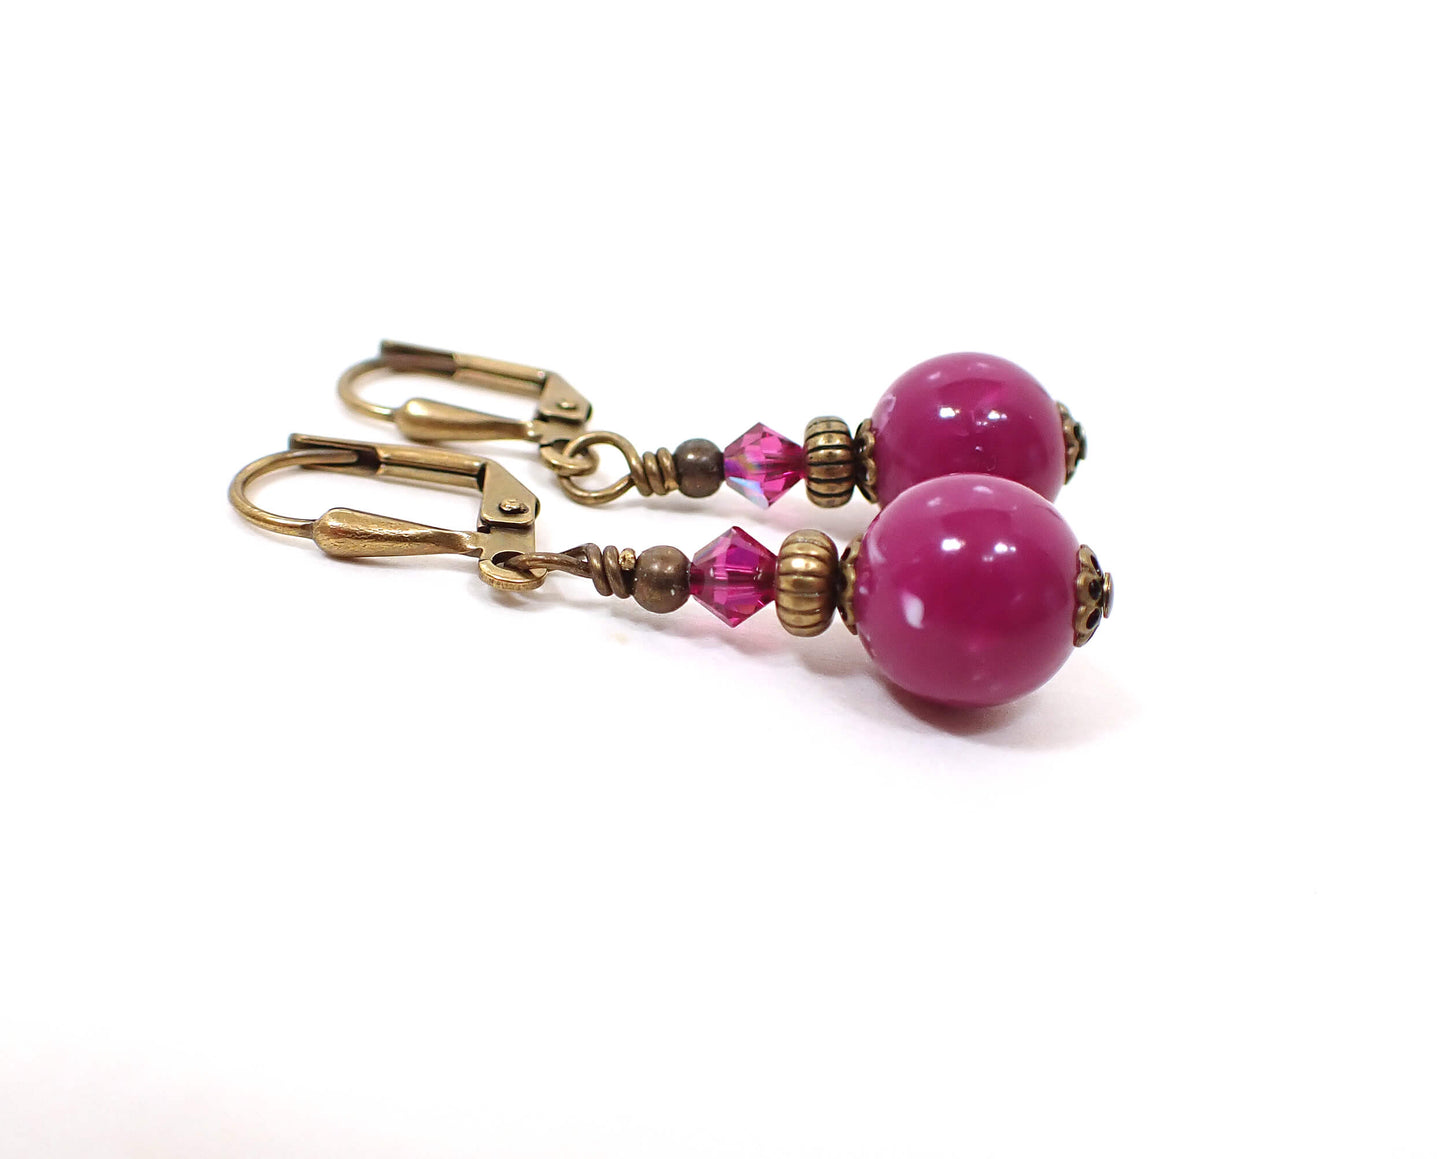 Small Antiqued Brass Fuchsia Purple Pink Lucite Handmade Drop Earrings Hook Lever Back or Clip On